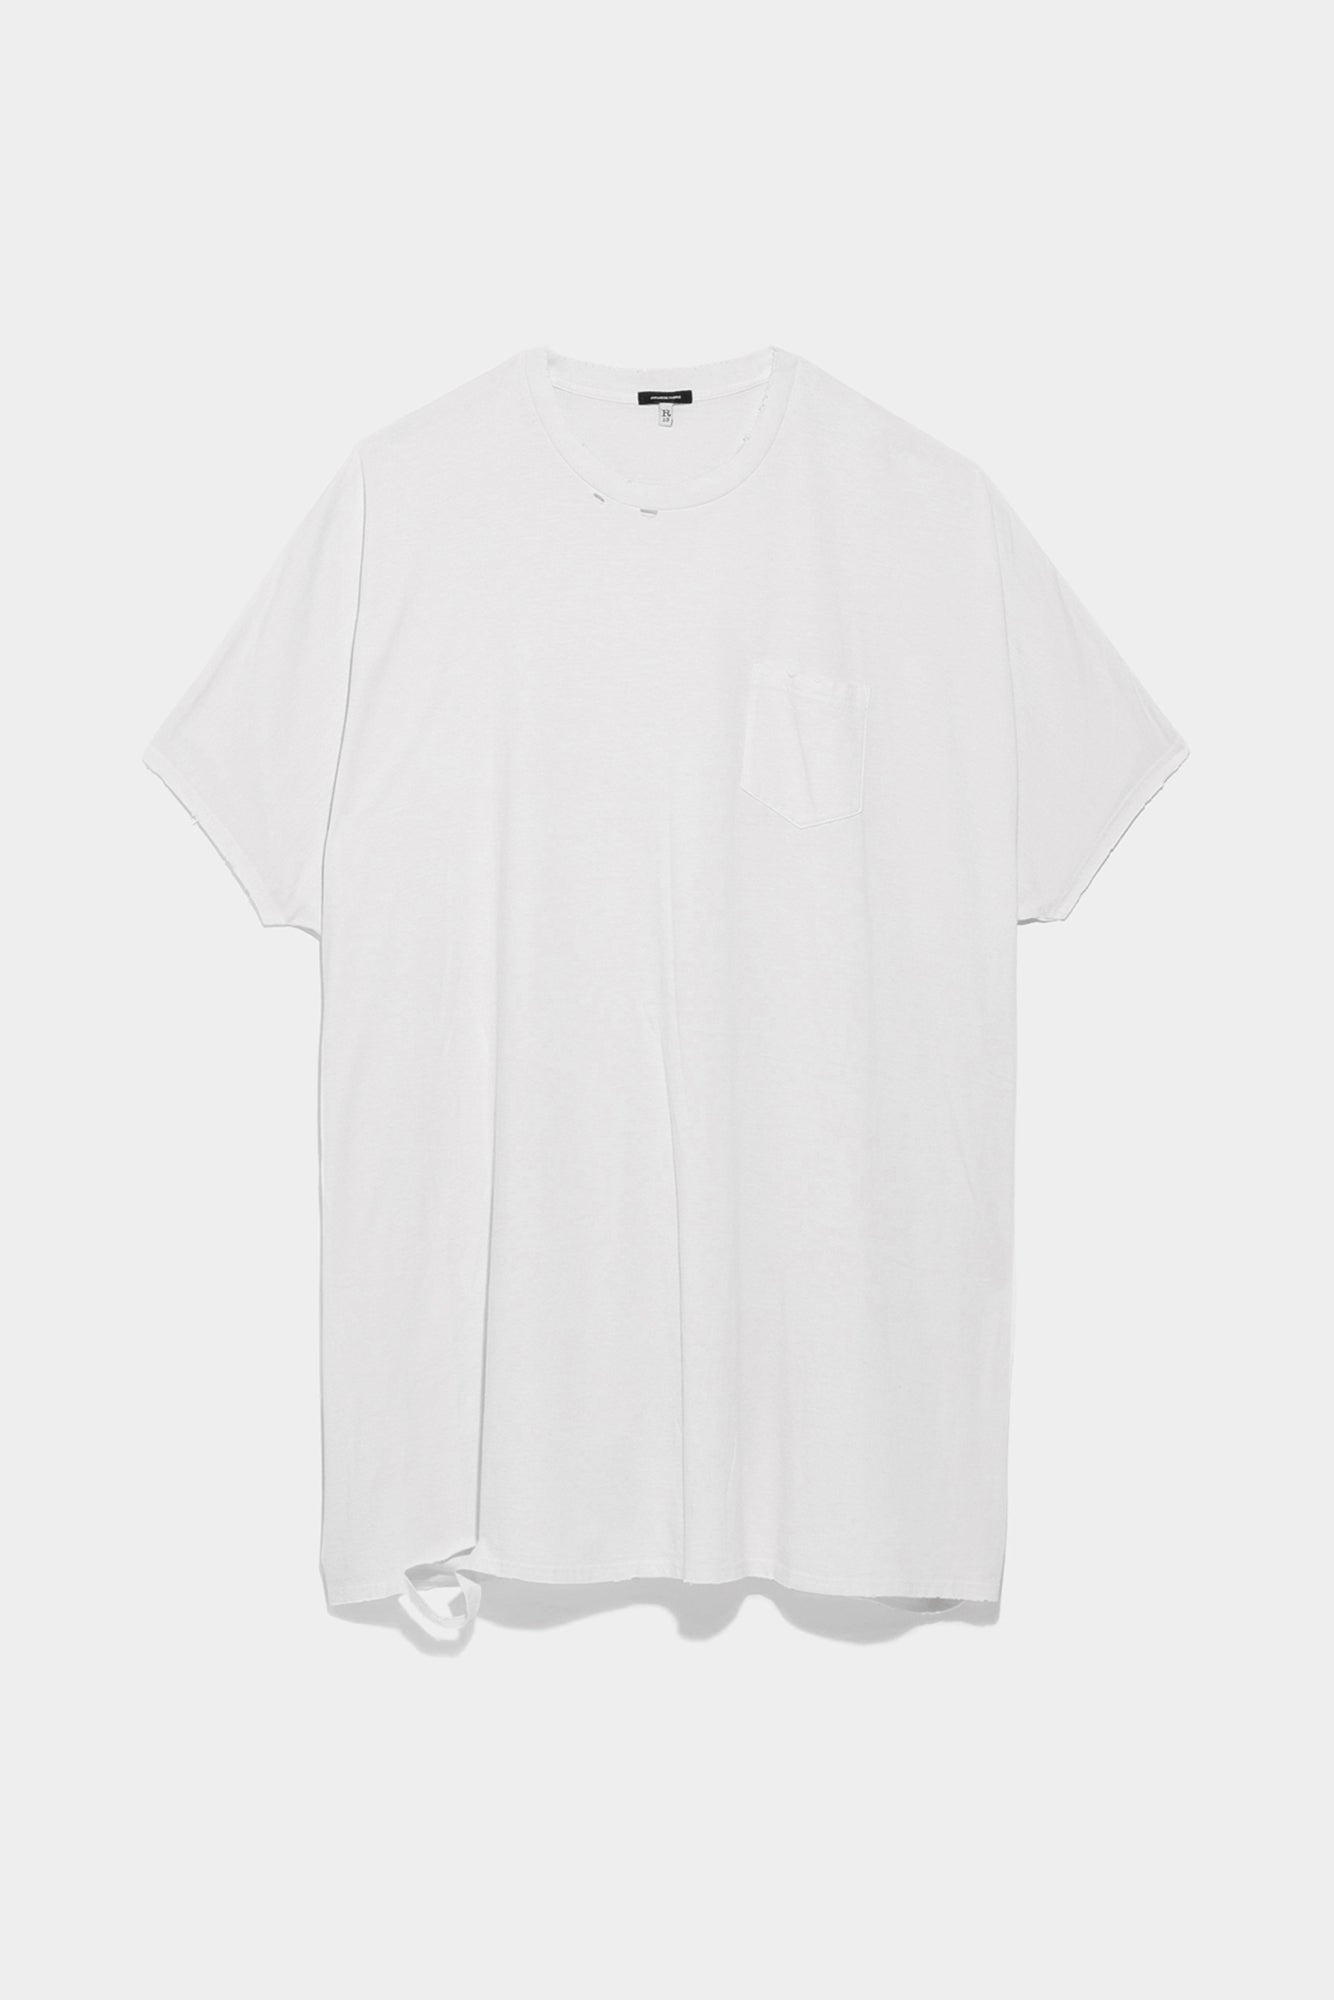 Oversized Boxy T - White | R13 Denim Official Site - 4